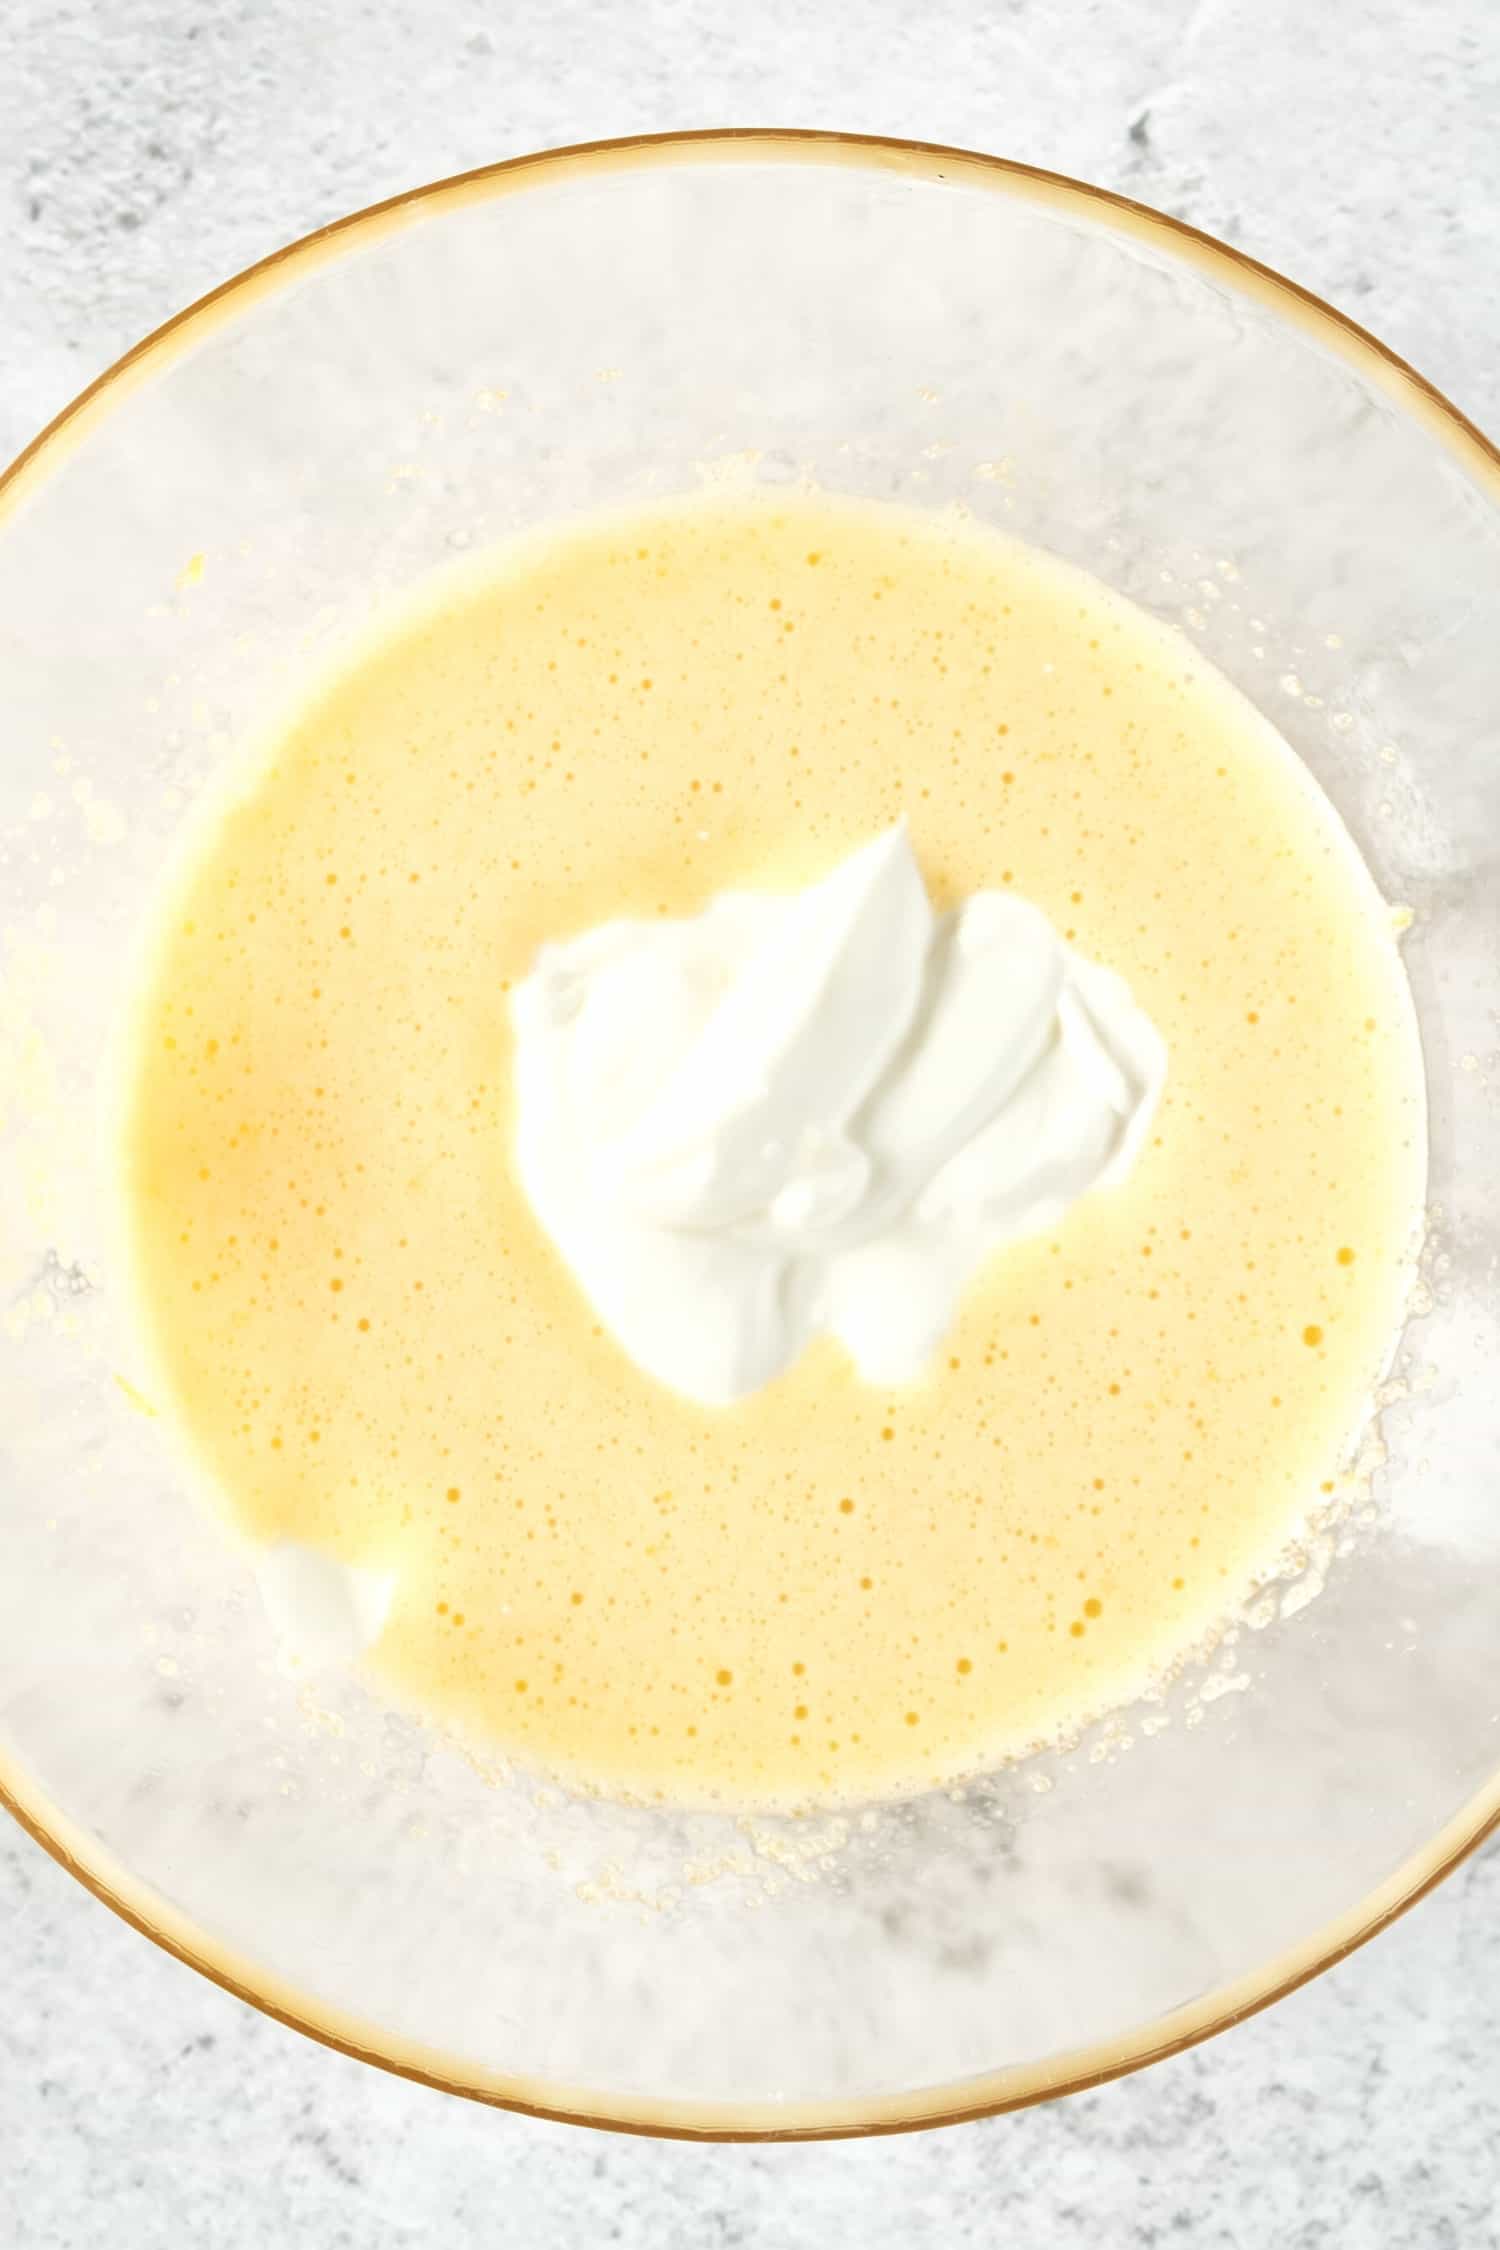 Yogurt on top of pale yellow cake batter in a bowl.